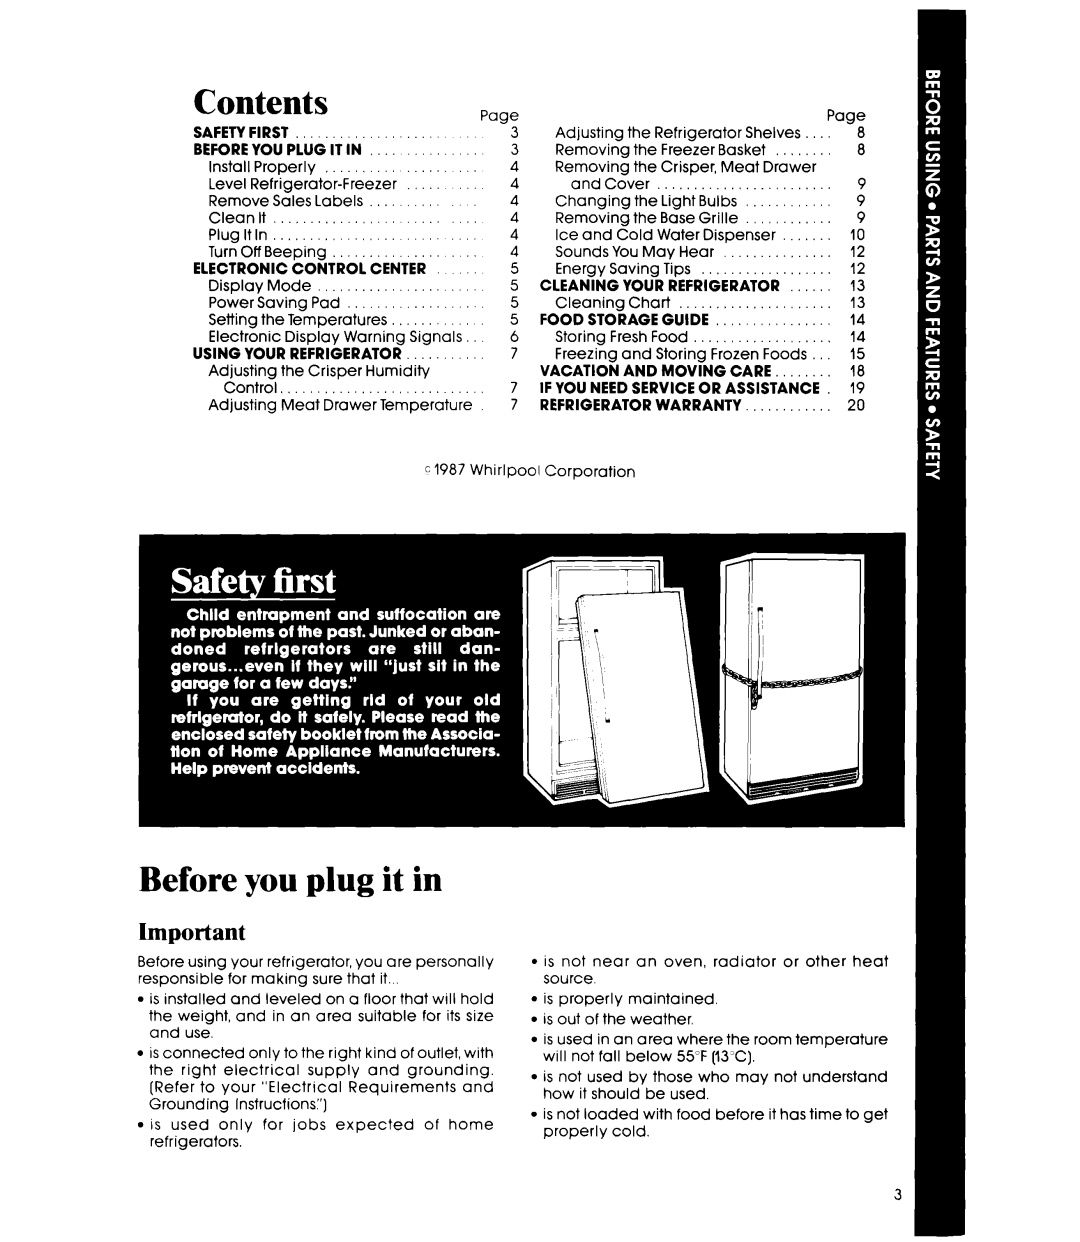 Whirlpool ED25PS manual Contents, Before you plug it in 